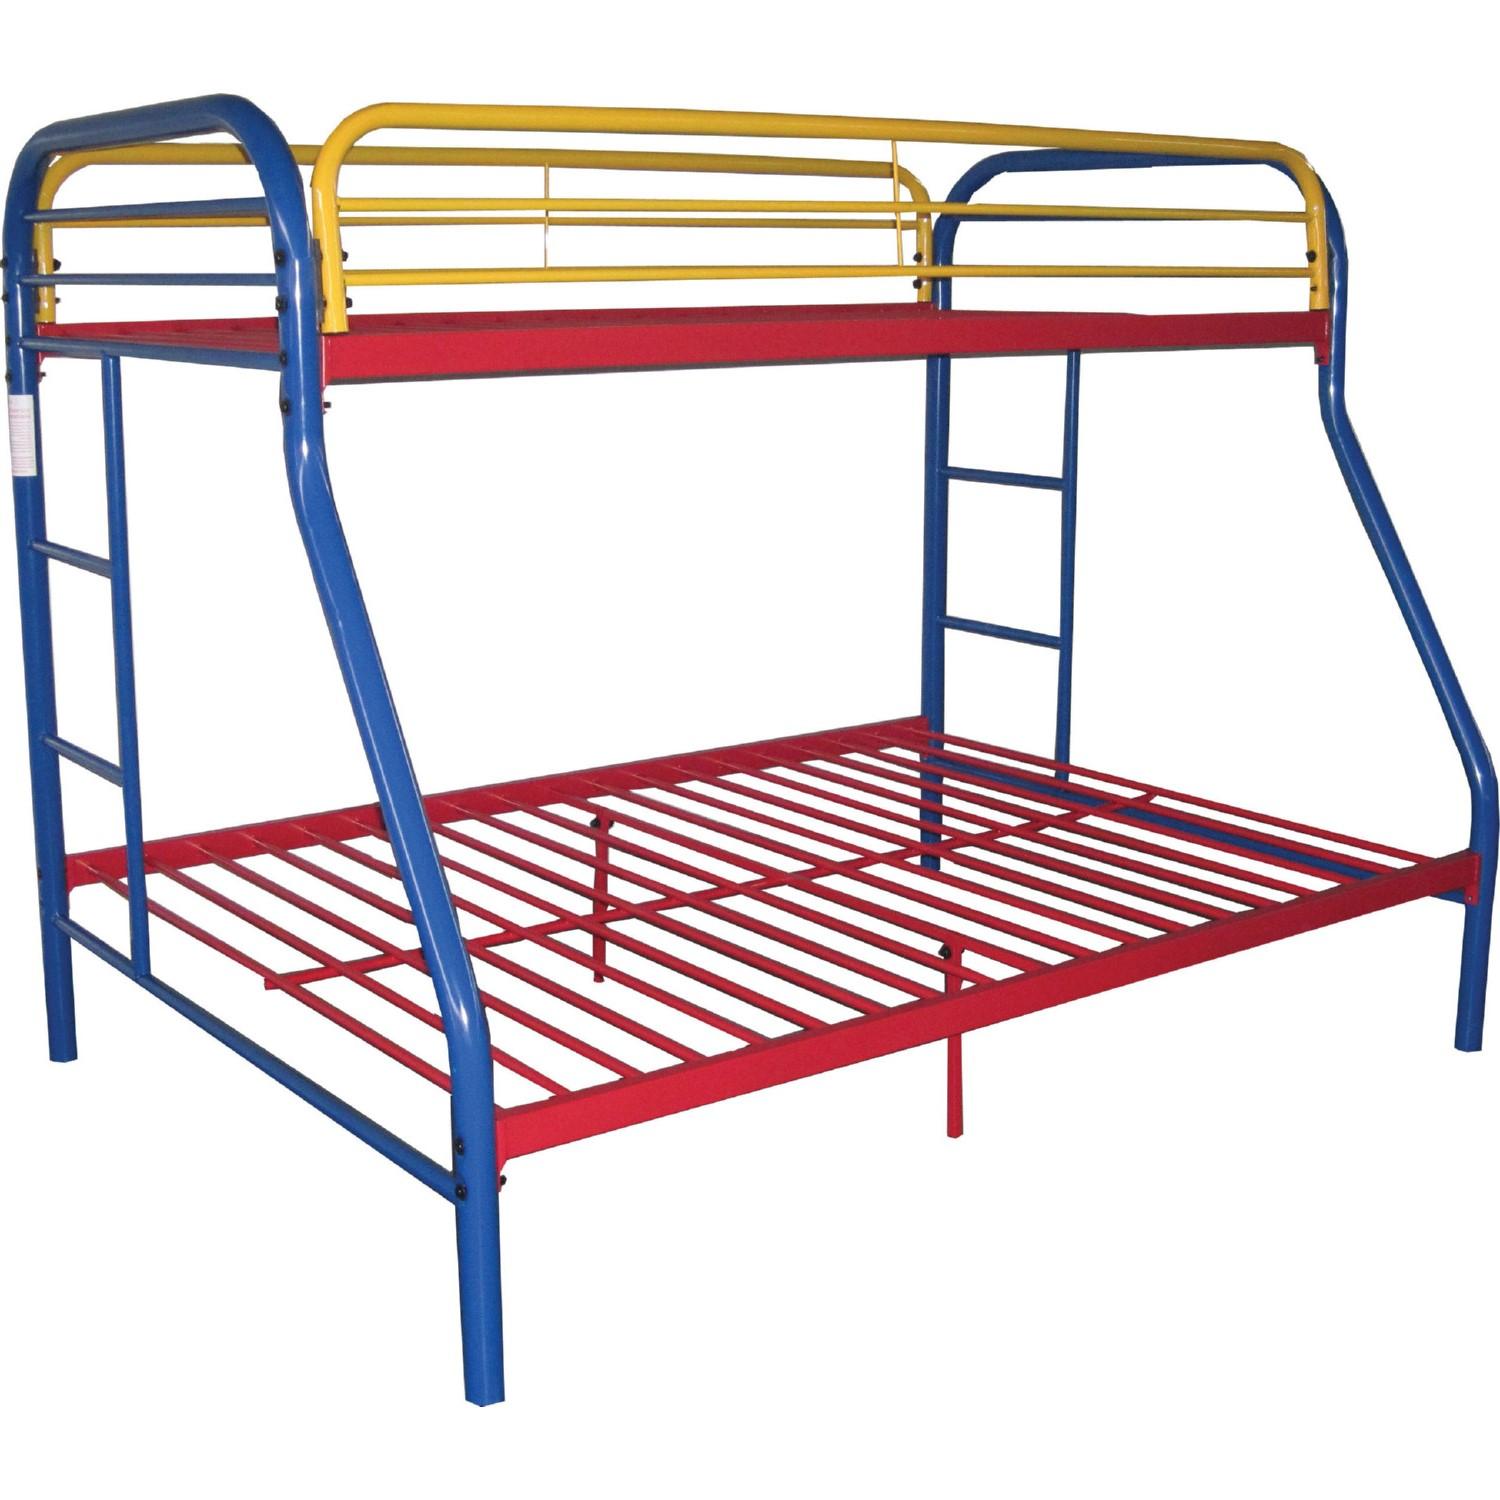 Transitional, Simple Twin/Full Bunk Bed Tritan 02053RNB in Multi-Color Patterned 